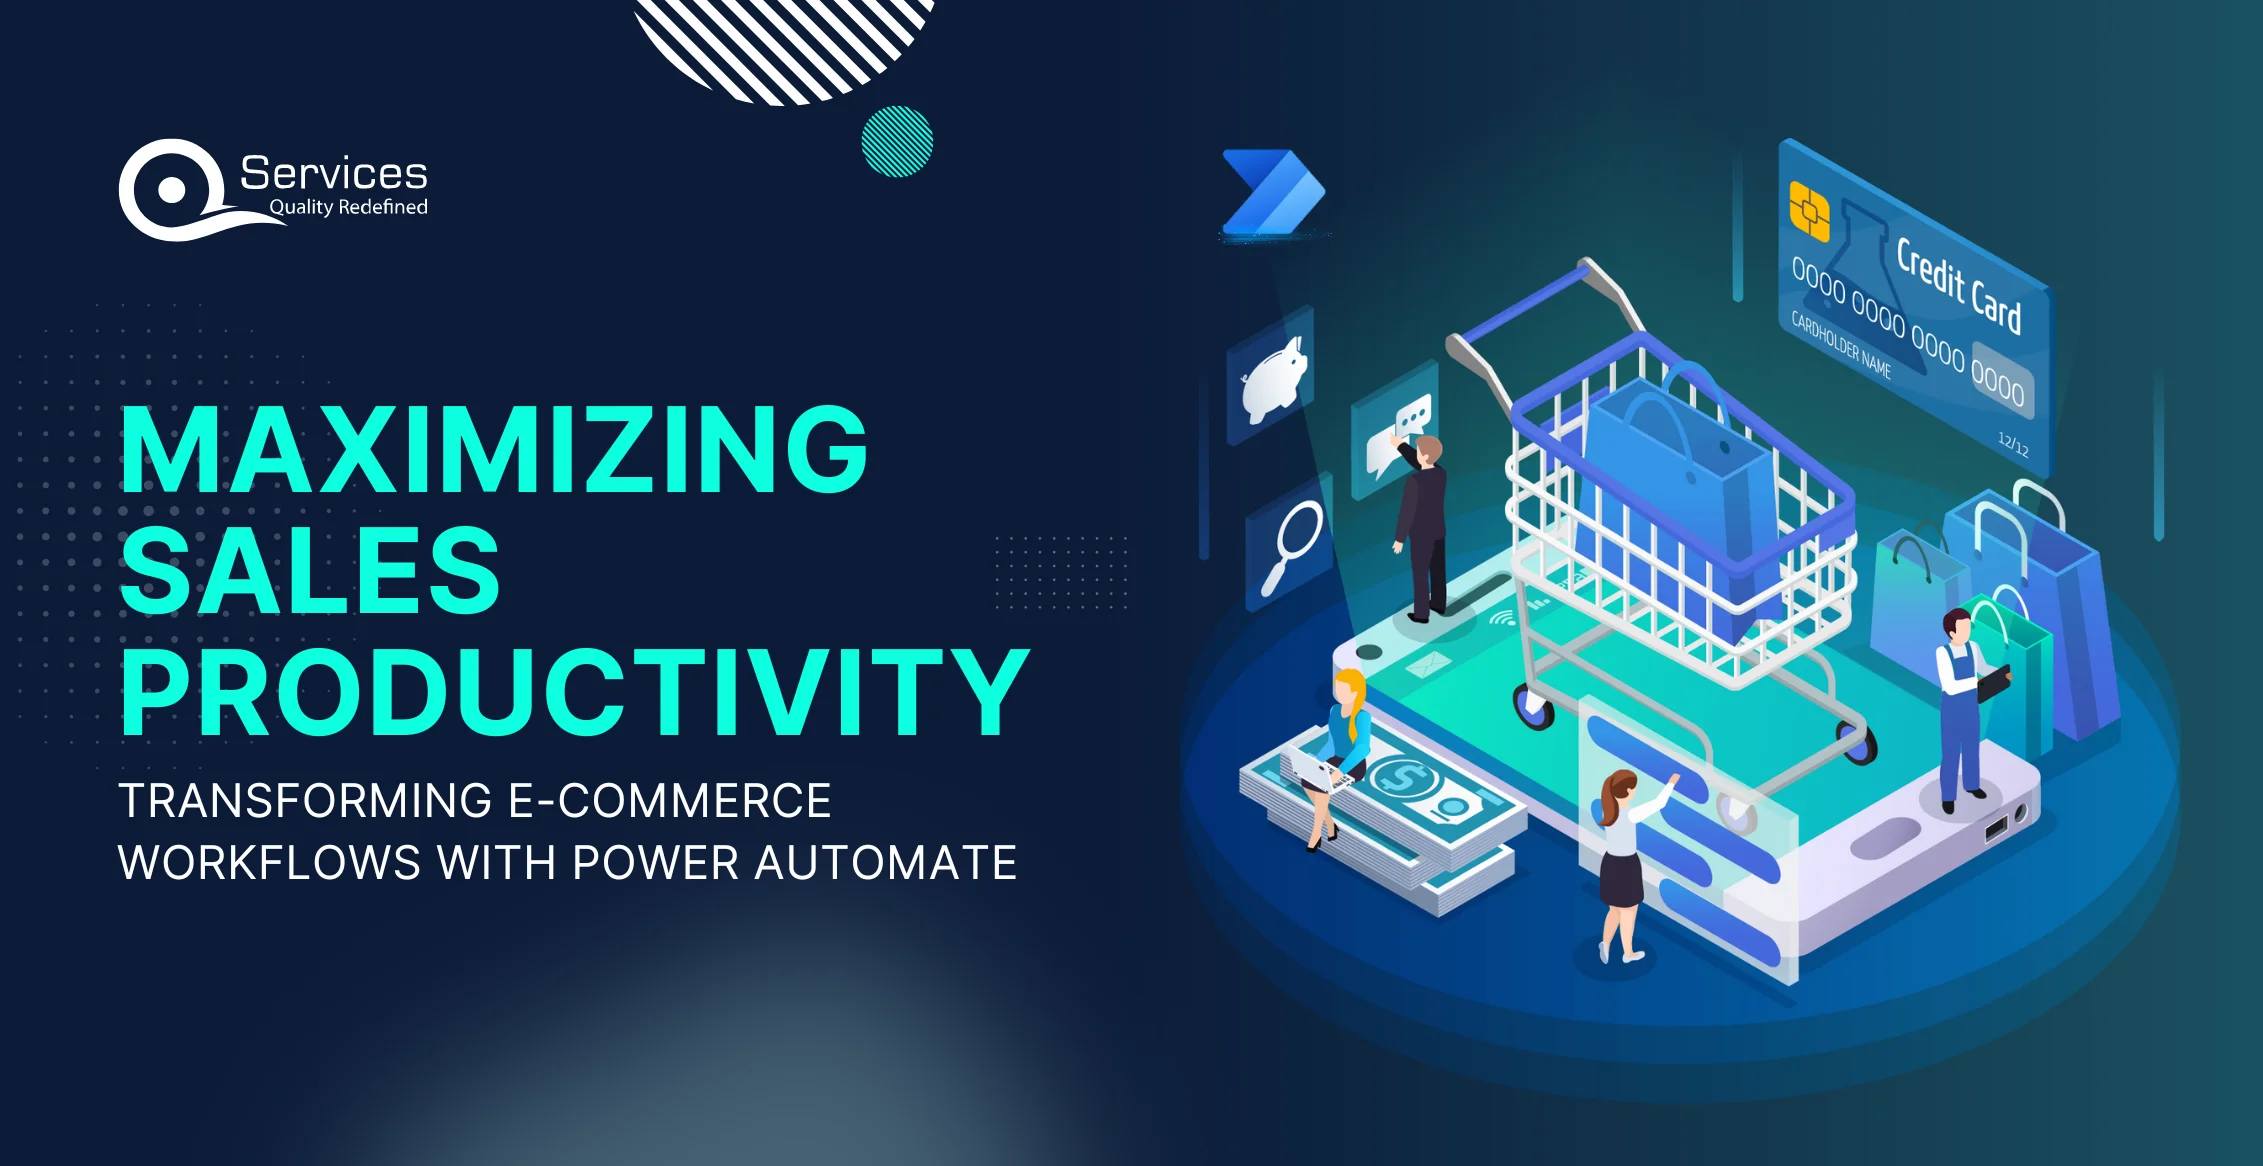 Maximizing sales Productivity - Transforming E-Commerce workflows with Power Automate